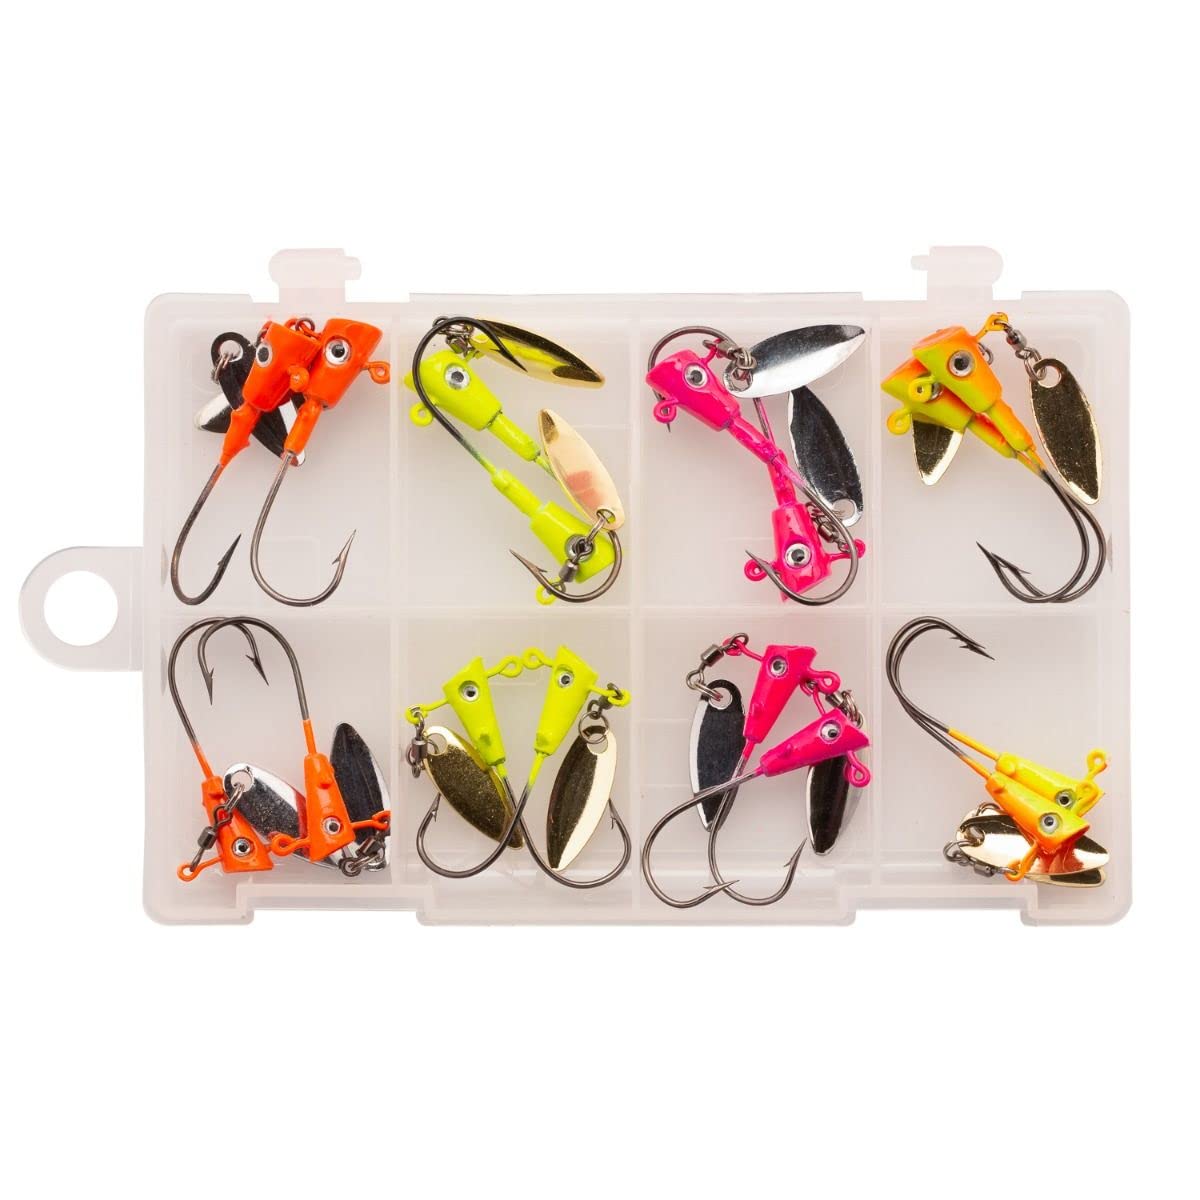 Search results for: '1 16 crappie magnet jig heavy 10pk